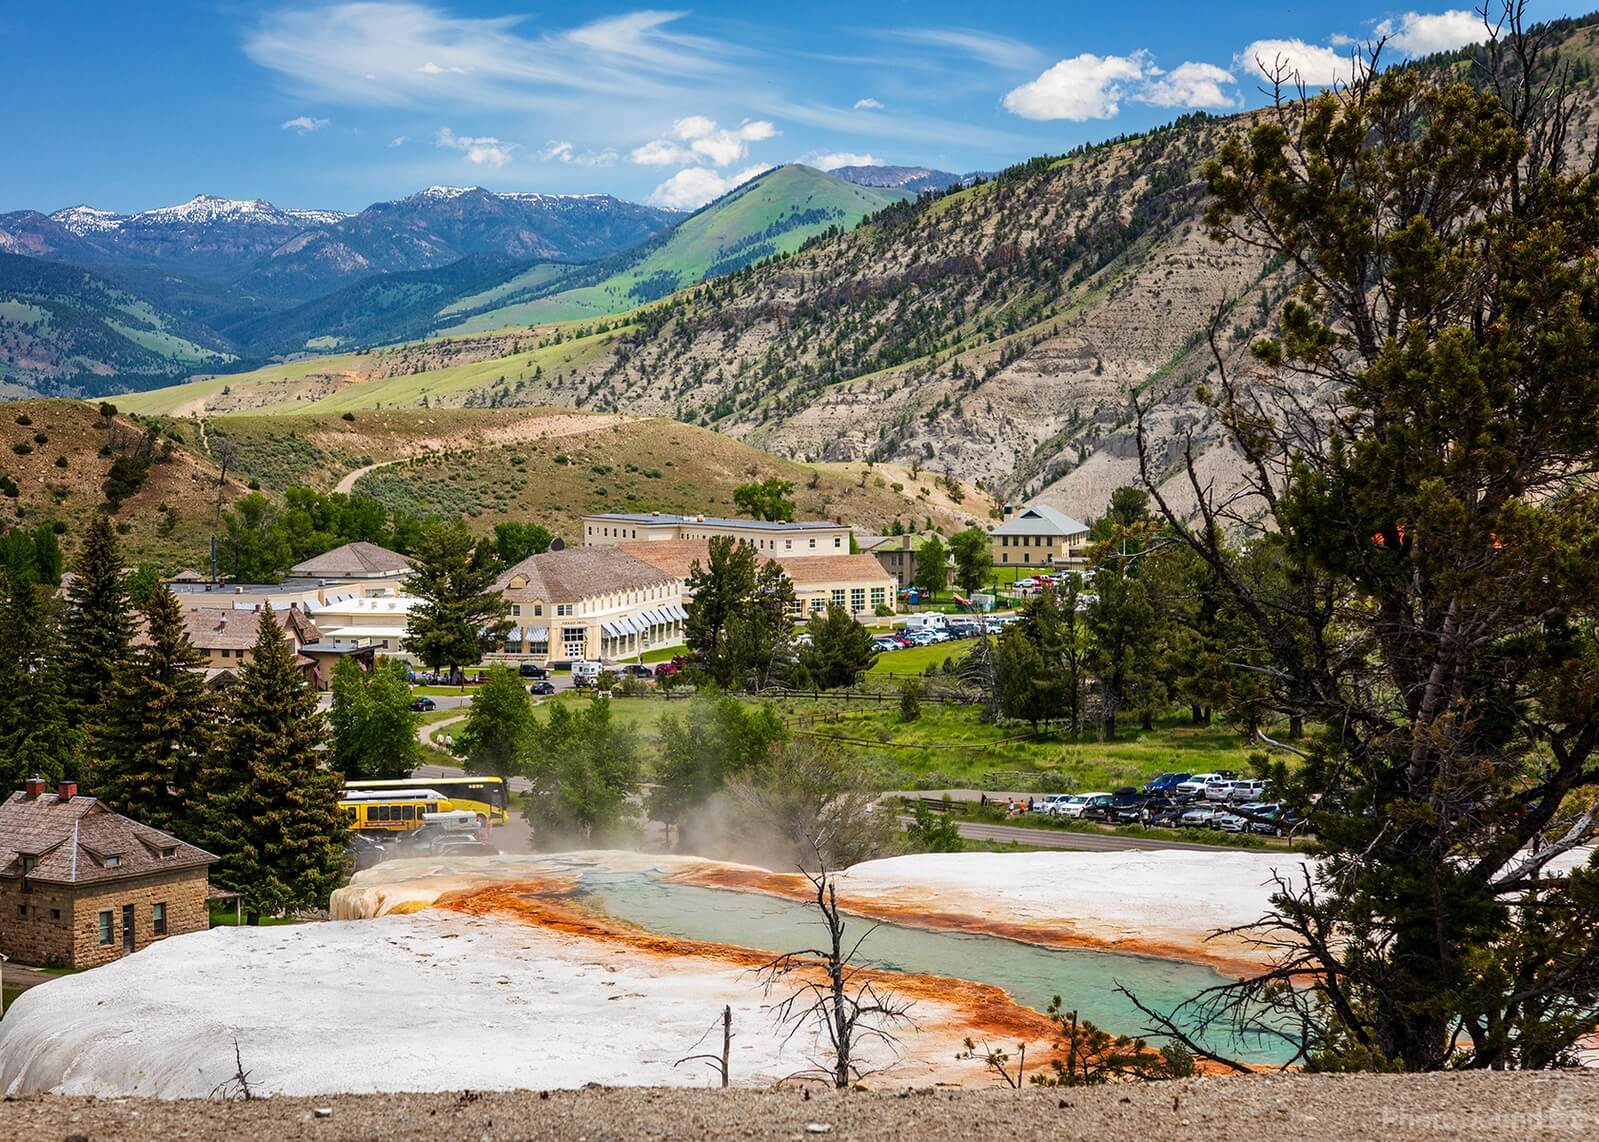 Image of Mammoth Hot Springs (MHS) General by Susan Budge